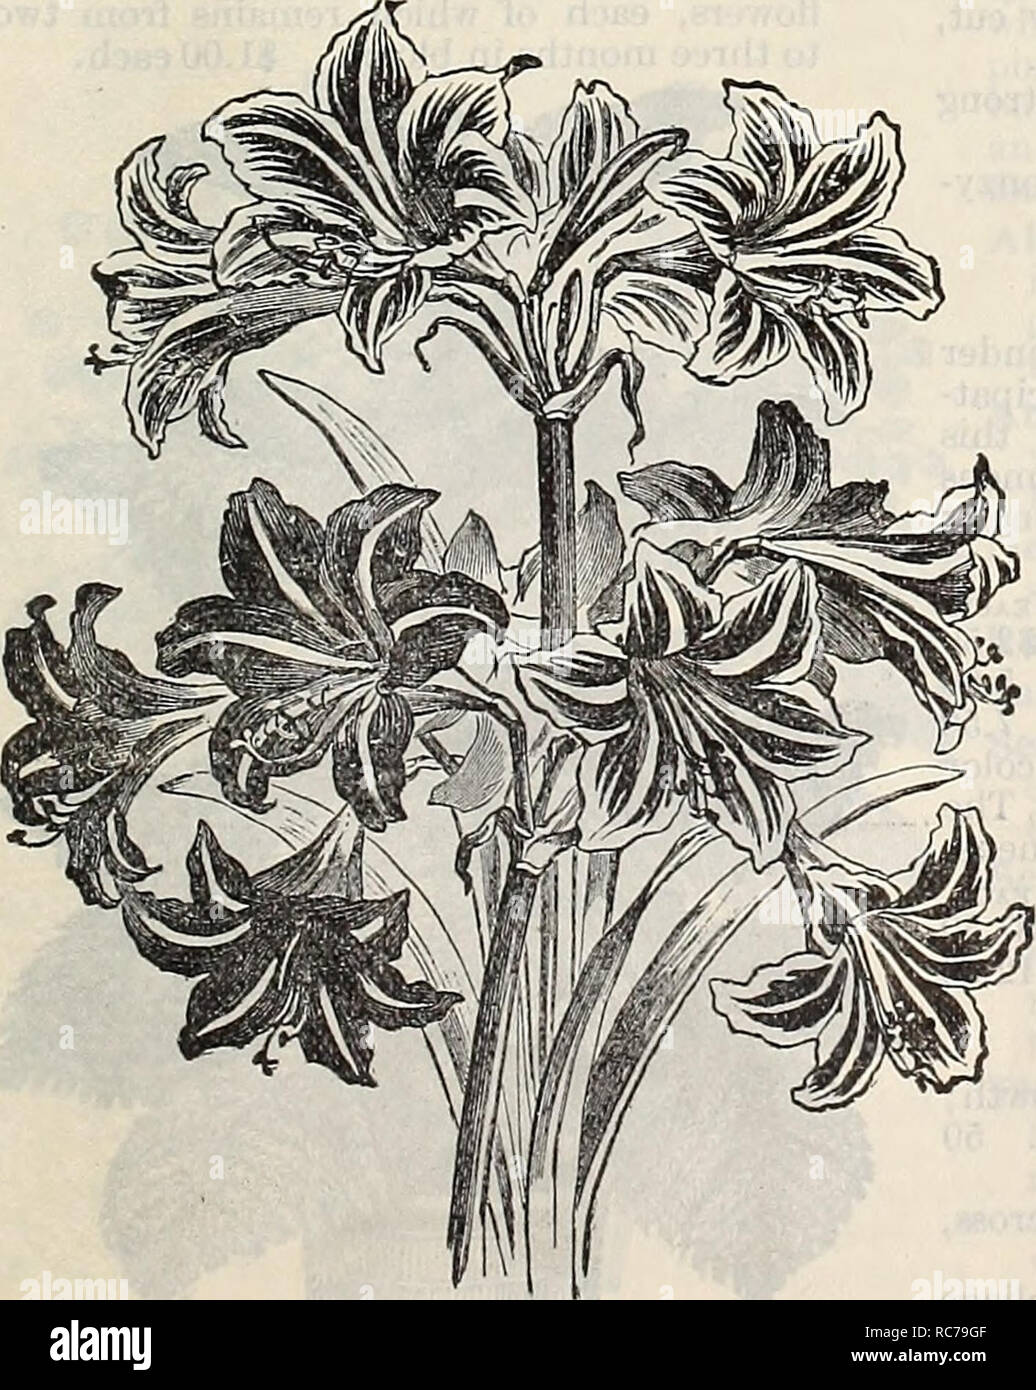 . Dreer's garden calendar : 1897. Seeds Catalogs; Nursery stock Catalogs; Gardening Equipment and supplies Catalogs; Flowers Seeds Catalogs; Vegetables Seeds Catalogs; Fruit Seeds Catalogs. Ardisia Crenulata.. house plant in winter. 25. ANTHEHIS CORO- NARIA DOUBLE, One of the most useful plants for bedding or pot culture. It bears its golden yellow double flowers profusely during the season, and can be recommended as a first-chiss edging plant. 15 cts. each ; §1.50 per doz. ARDISIA CRENULATA. A very ornamental green- house plant, with dark evergreen foliage, producing clusters of brilliant red Stock Photo